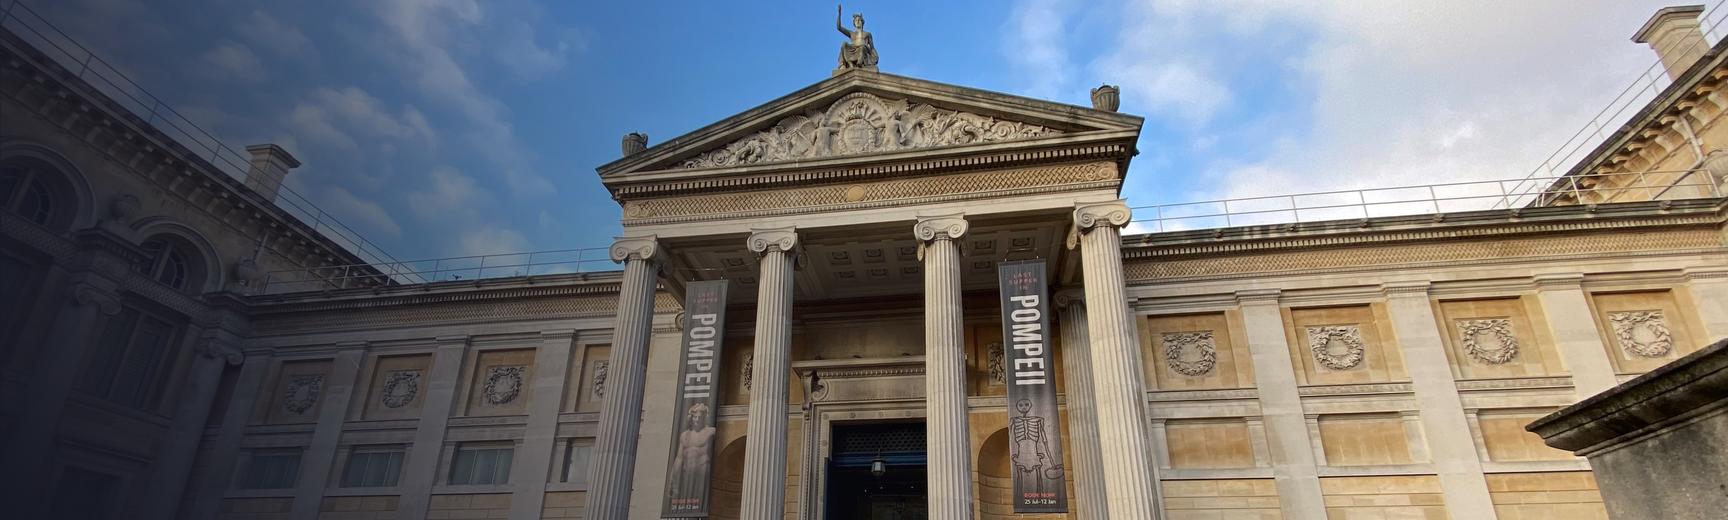 The exterior of the Ashmolean Museum, looking up from ground level on Beaumont Street